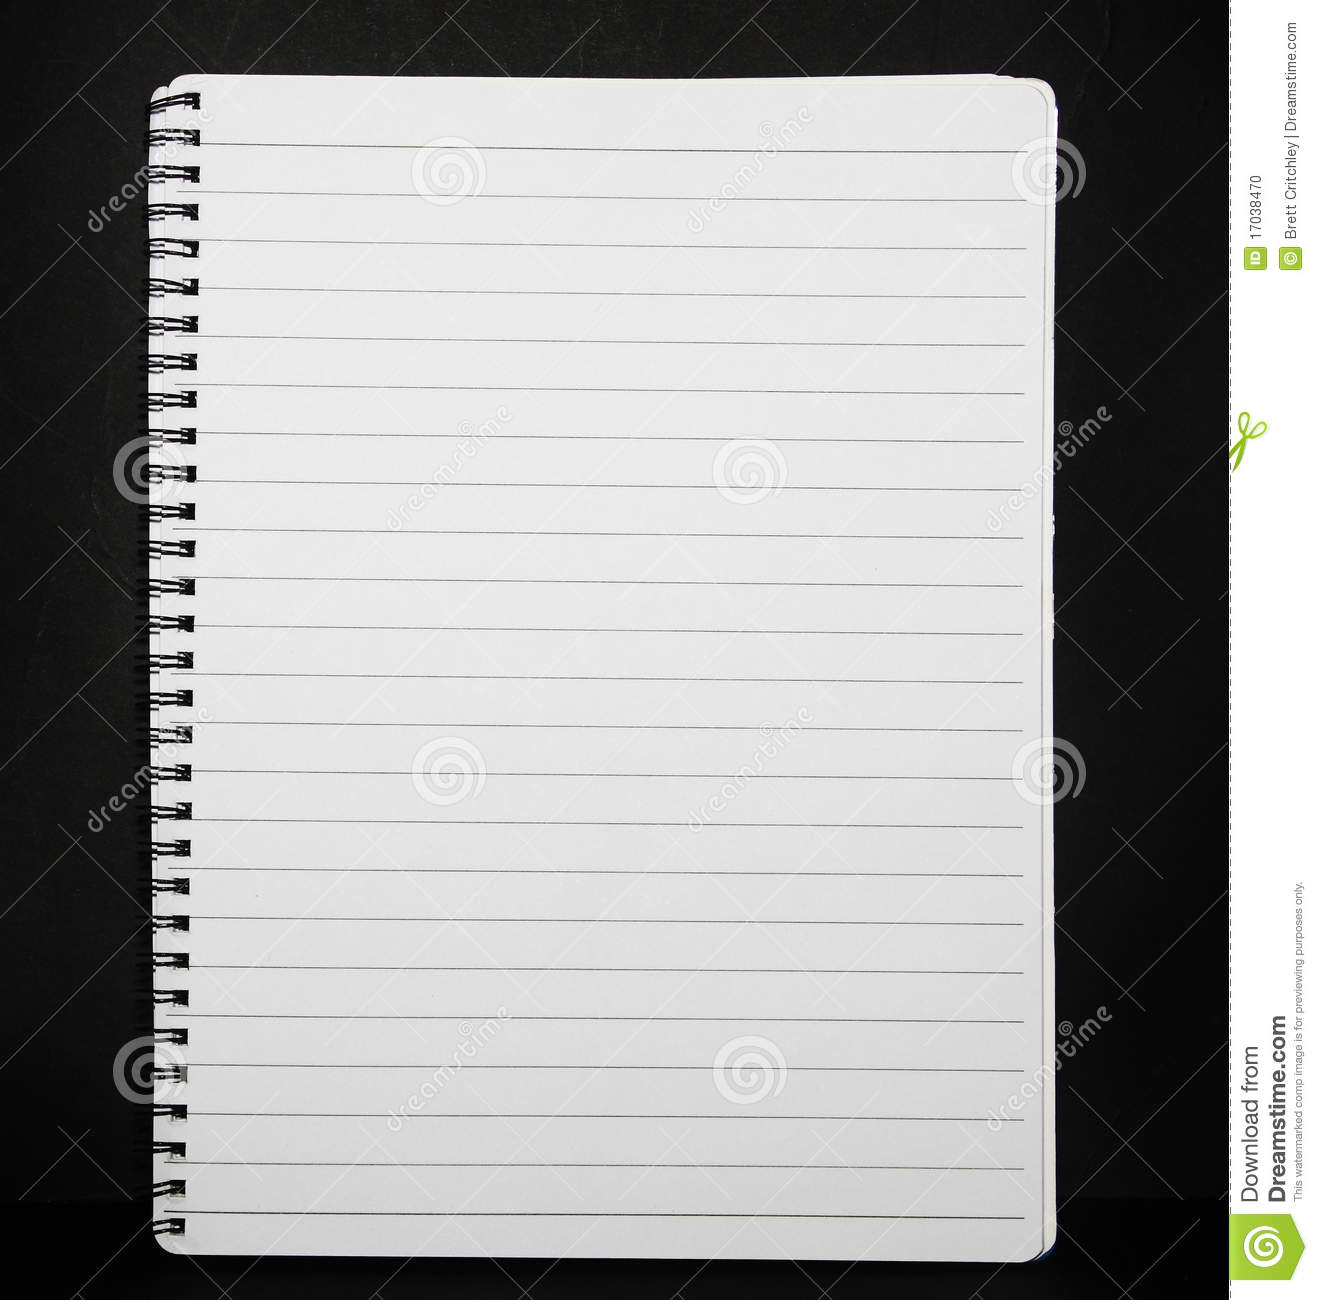 Large A4 Empty Blank Note Pad   Book With Lined Paper Background